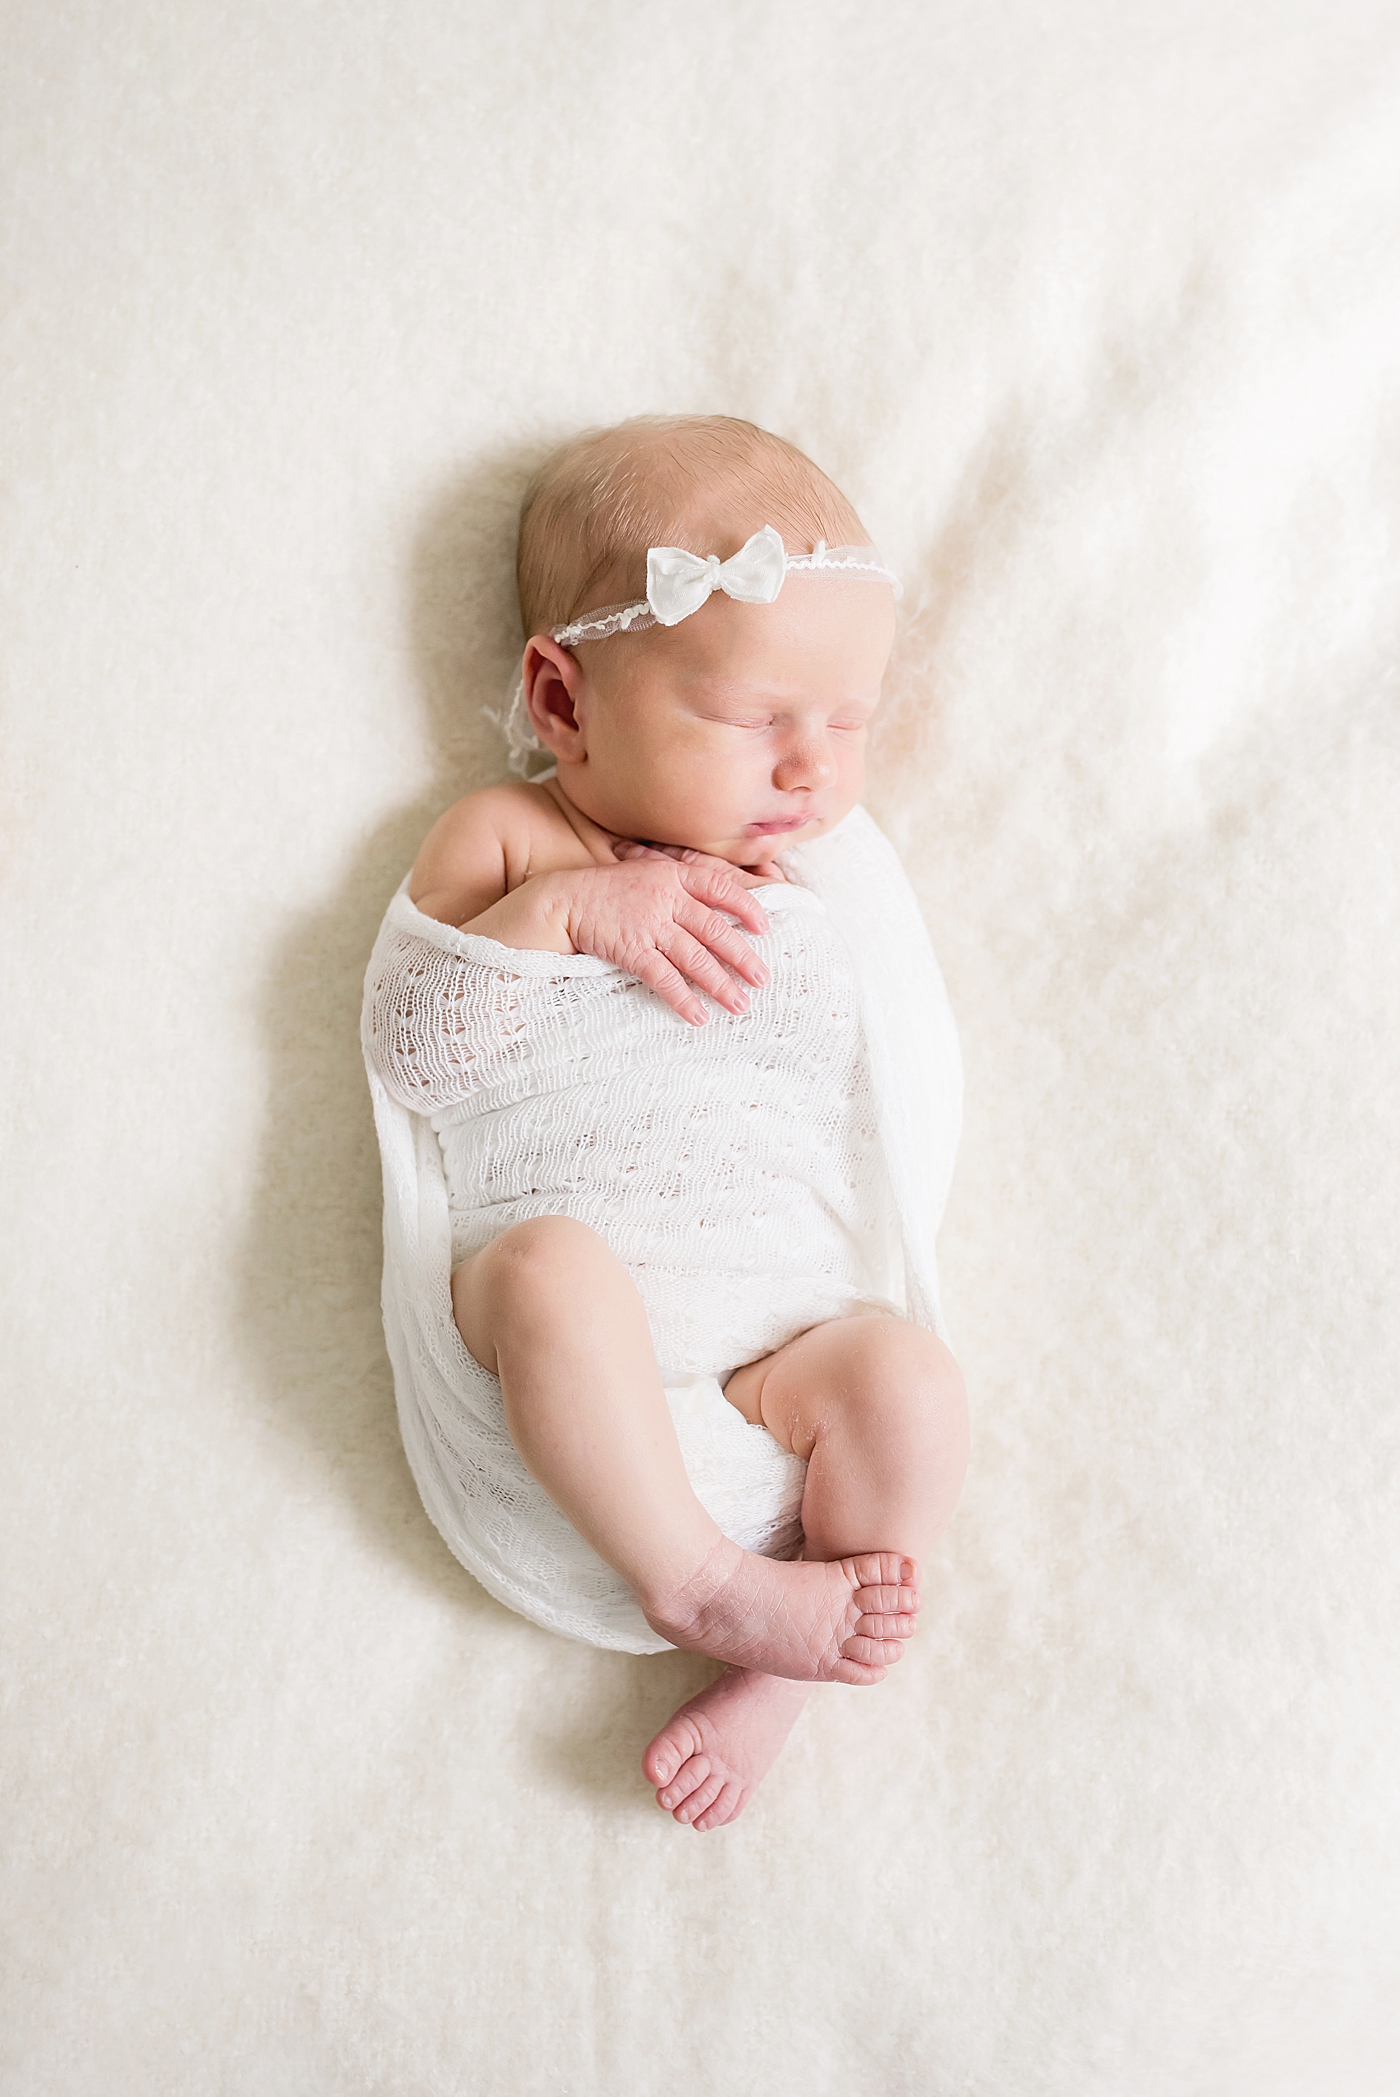 Baby girl with bow headband wrapped in white swaddle | Photo by Anna Wisjo Photography